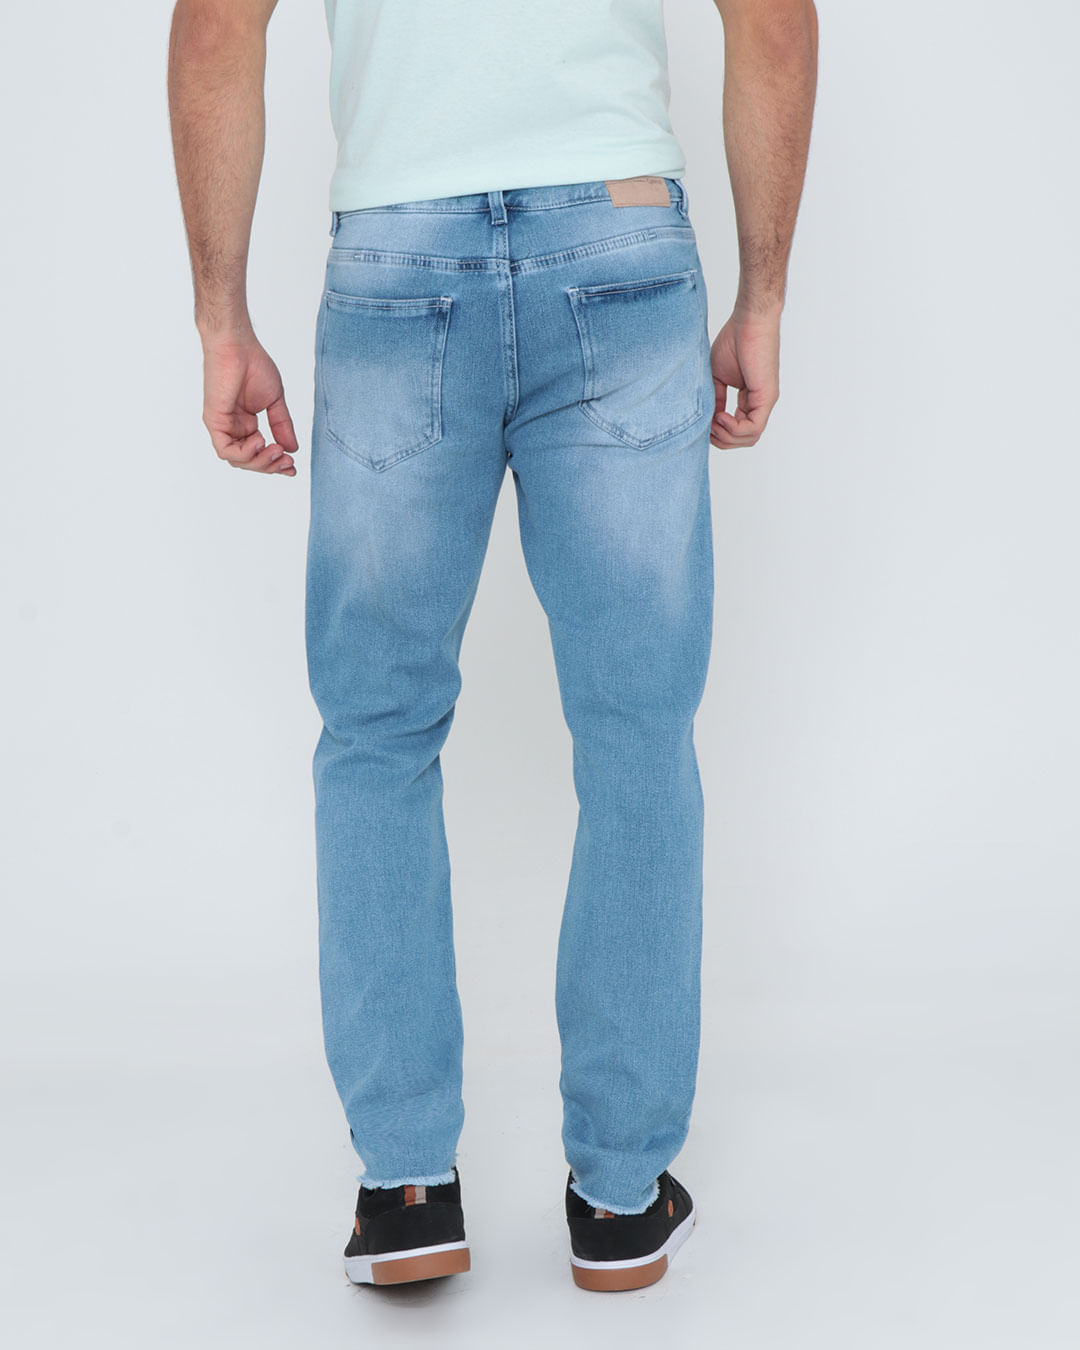 Calca-Jns-2102646-Cropped-Azm-Mol---Blue-Jeans-Claro